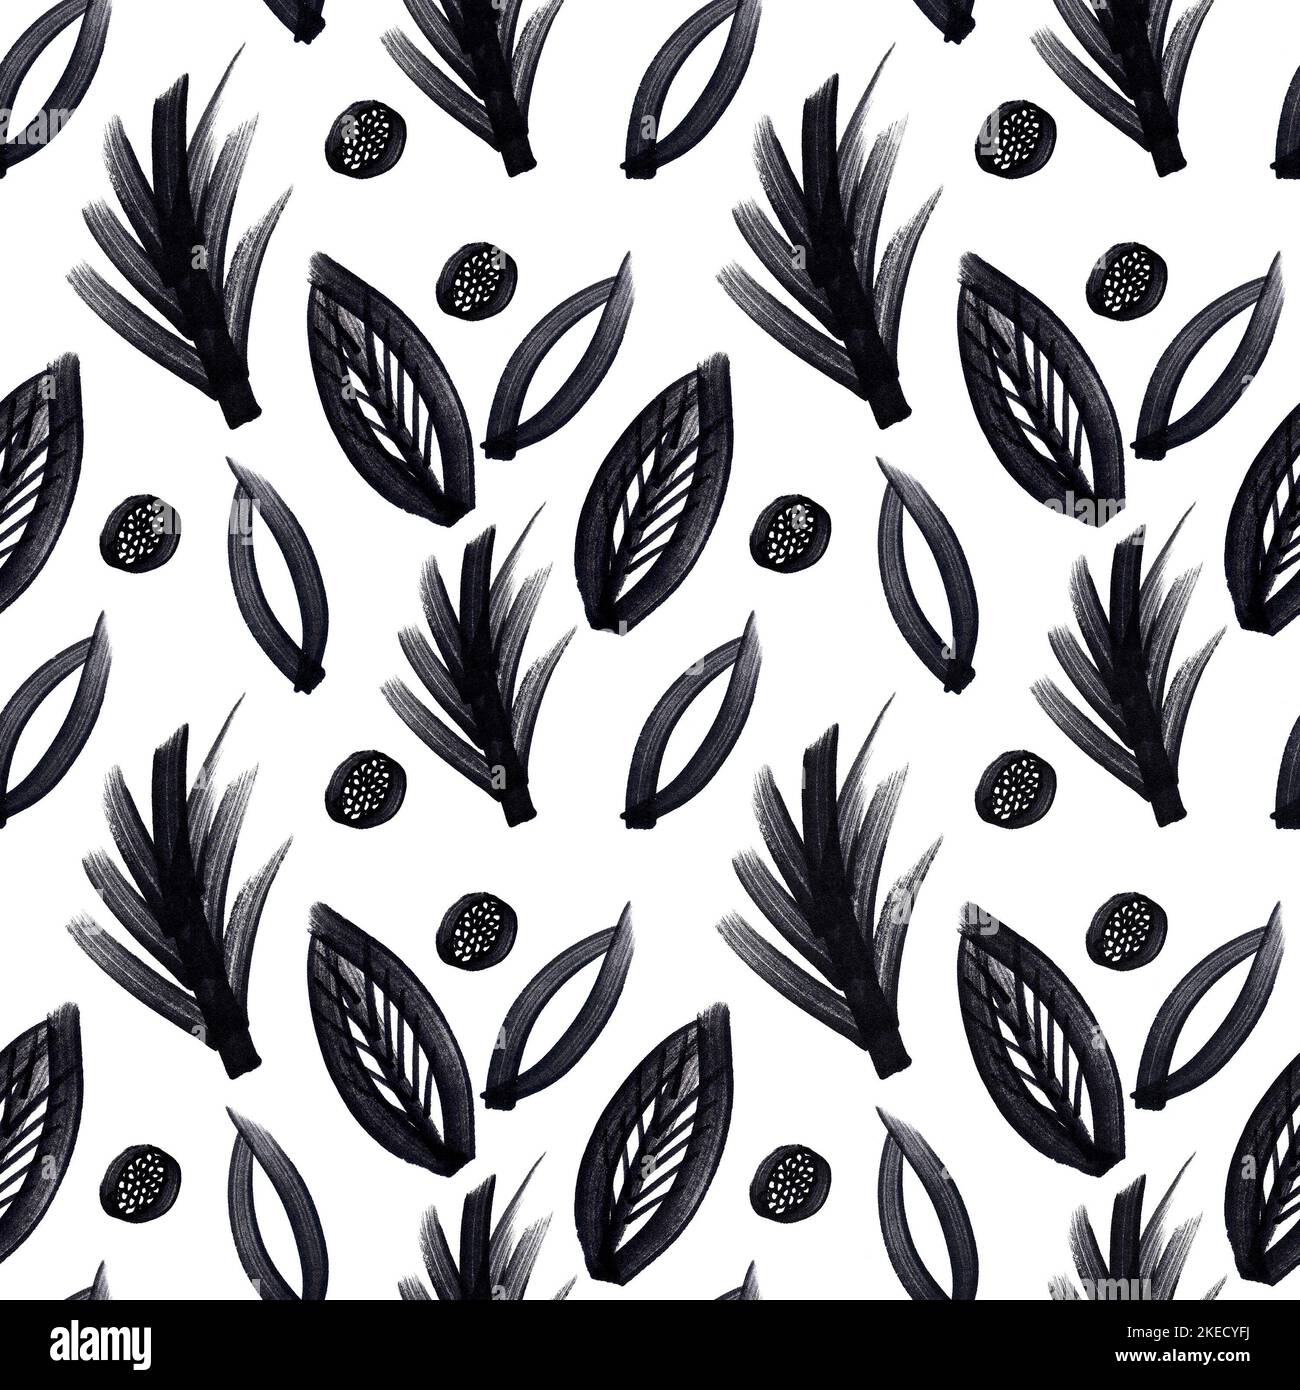 Hand drawn black and white seamless pattern with floral motifs Stock Photo